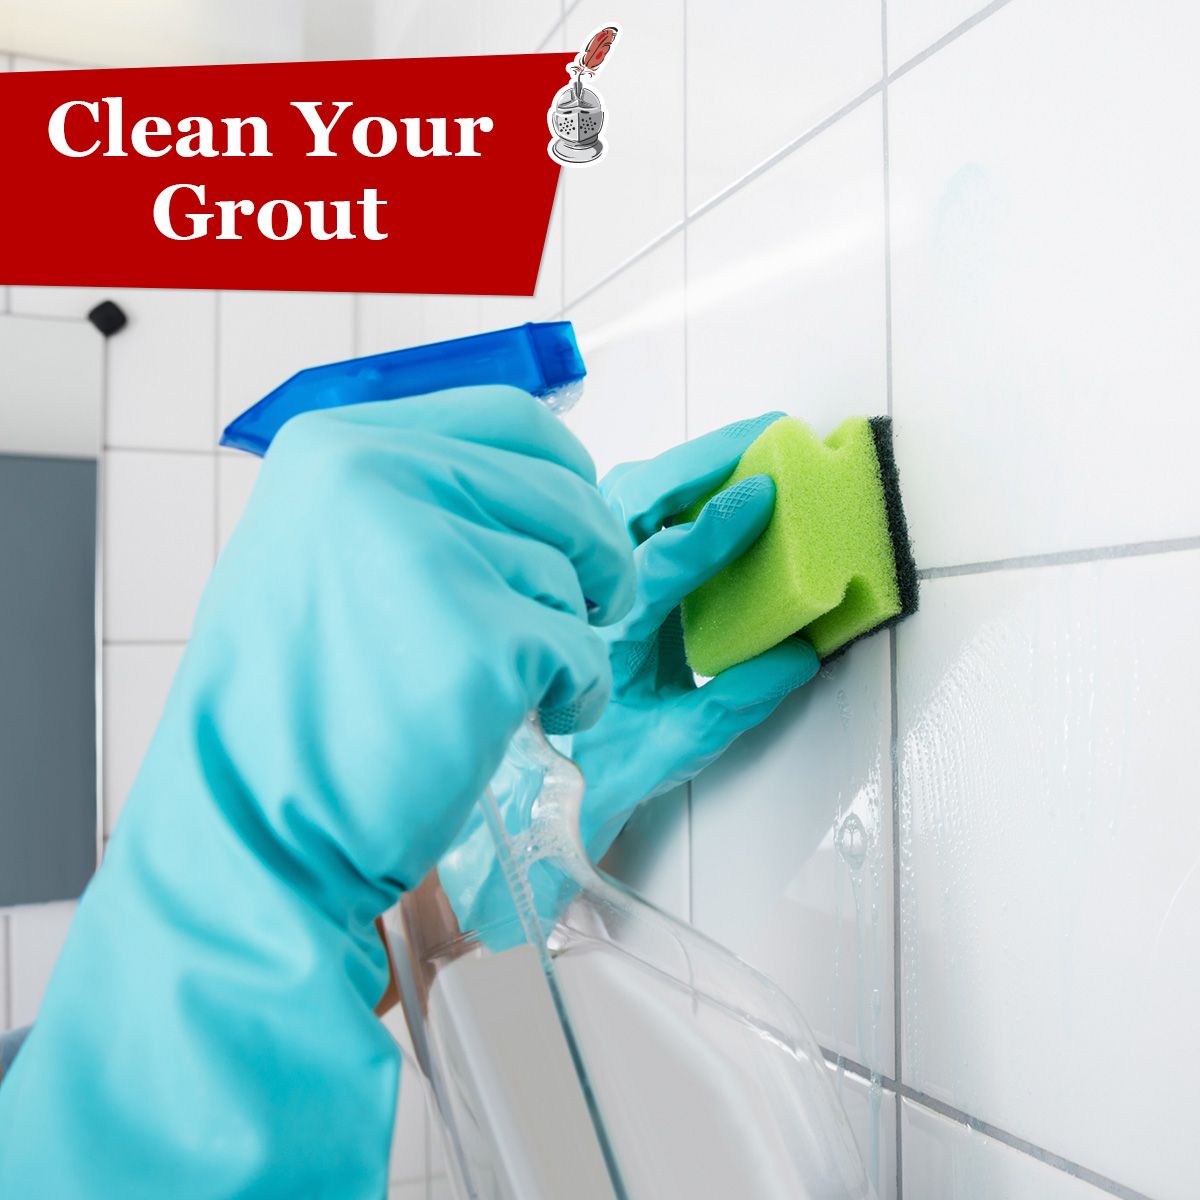 Ready For a Grout Transformation?